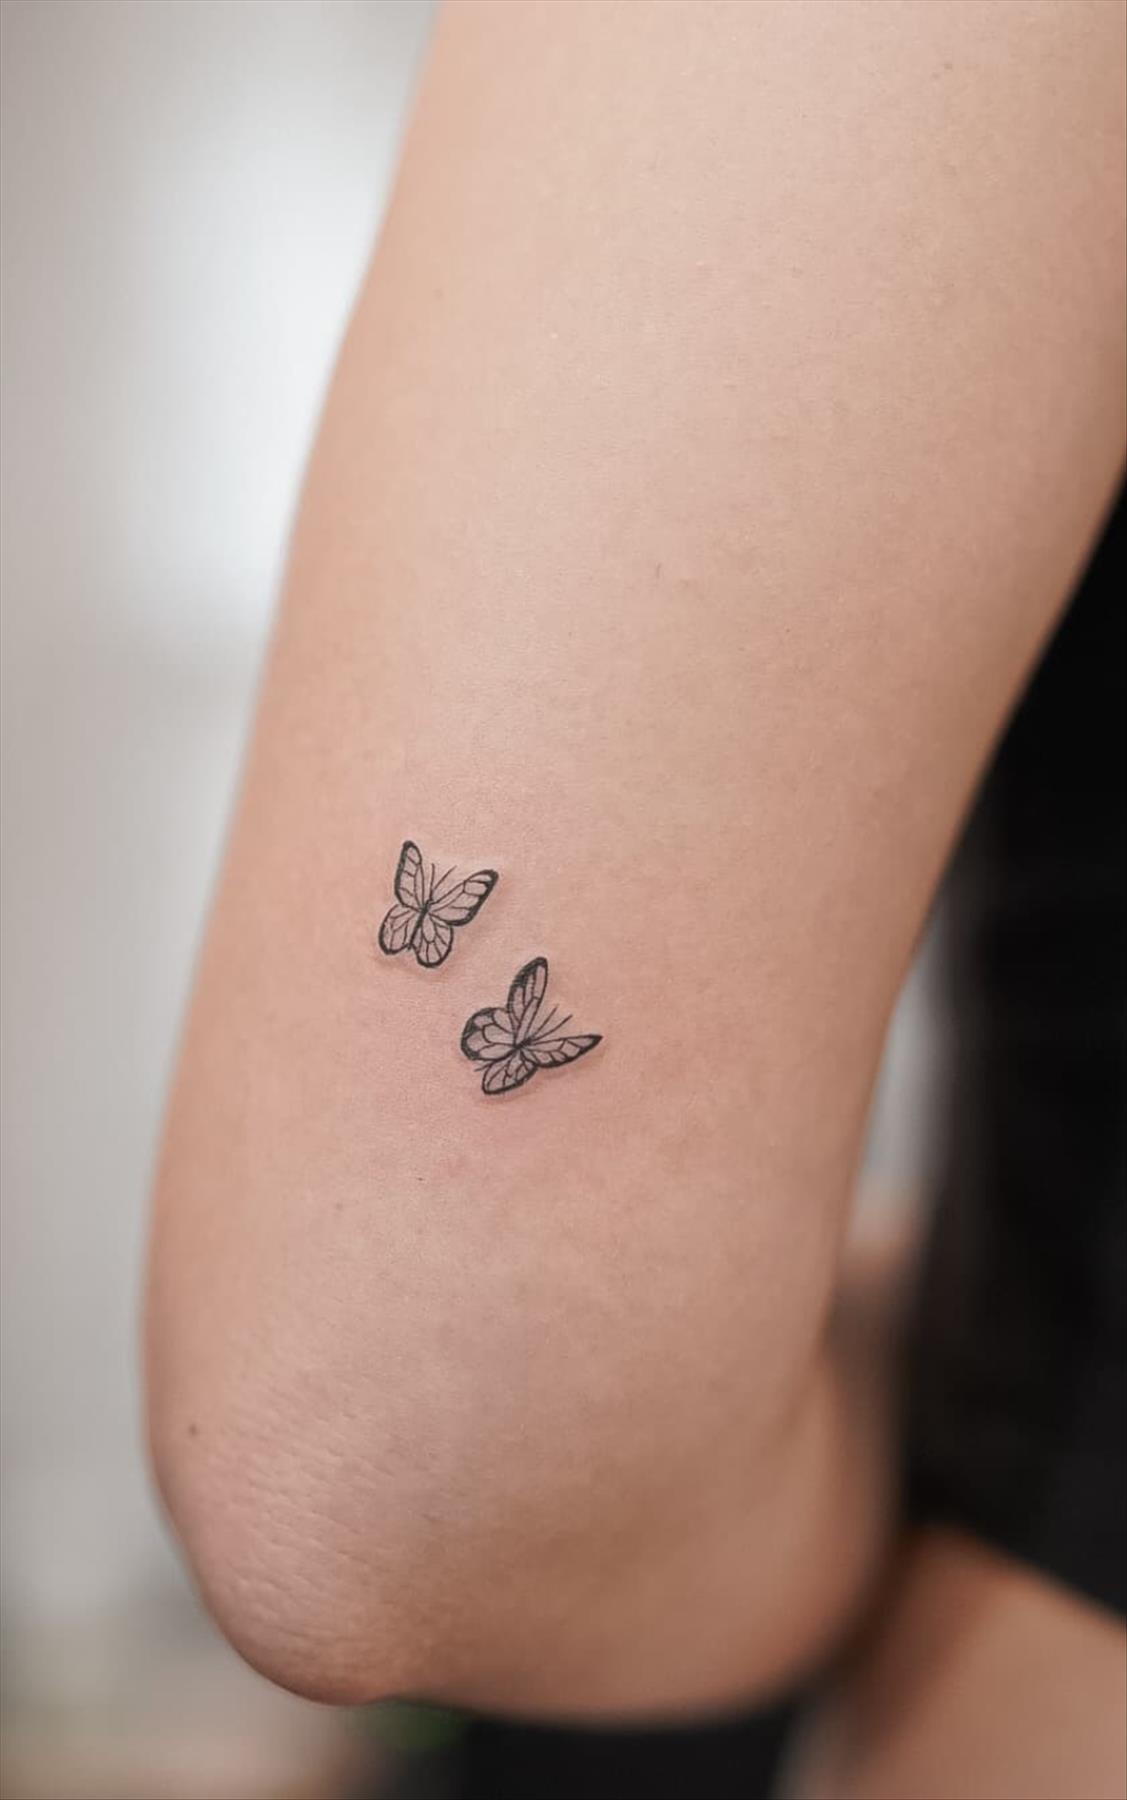 Pretty Butterfly Tattoo Ideas to Inspire Your Next Inked Tattoo